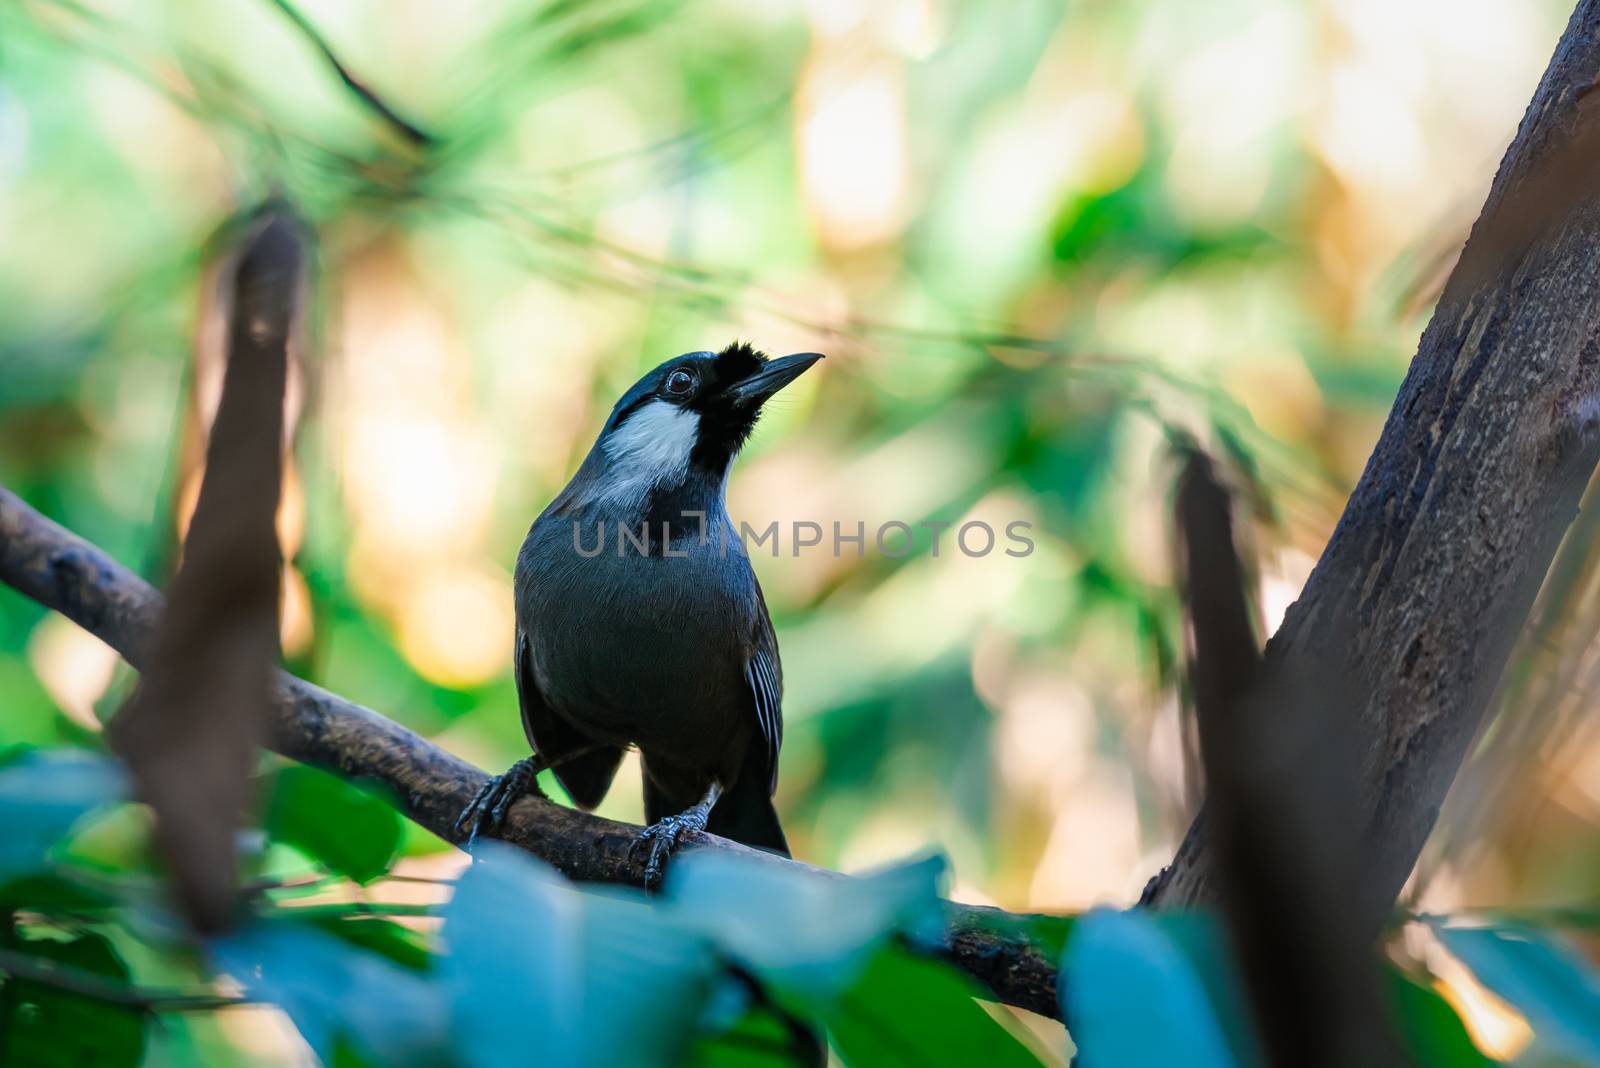 Bird (Black-throated Laughingthrush, Garrulax chinensis, Pterorhinus chinensis) is a species of bird in the family Leiothrichidae. It is found in asia perched on a tree in a nature wild